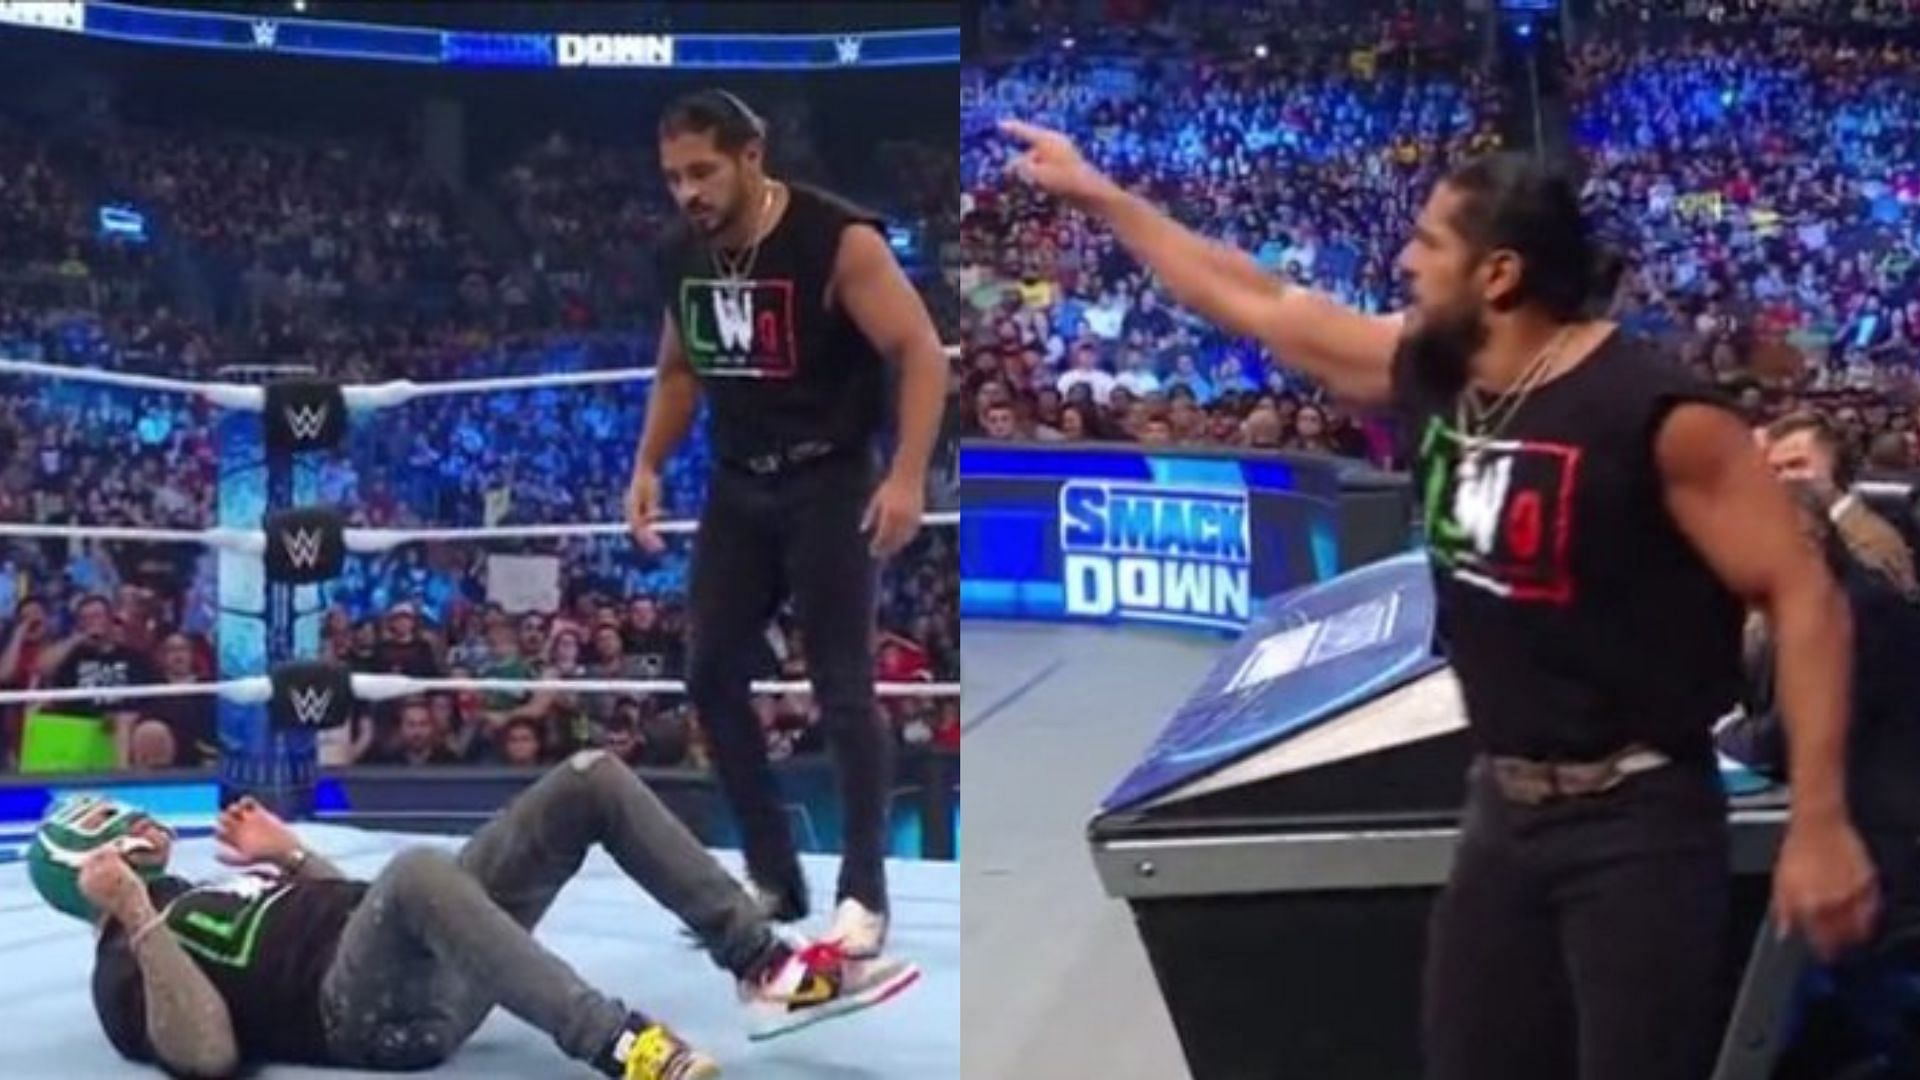 Santos Escobar turned his back on Rey Mysterio on SmackDown